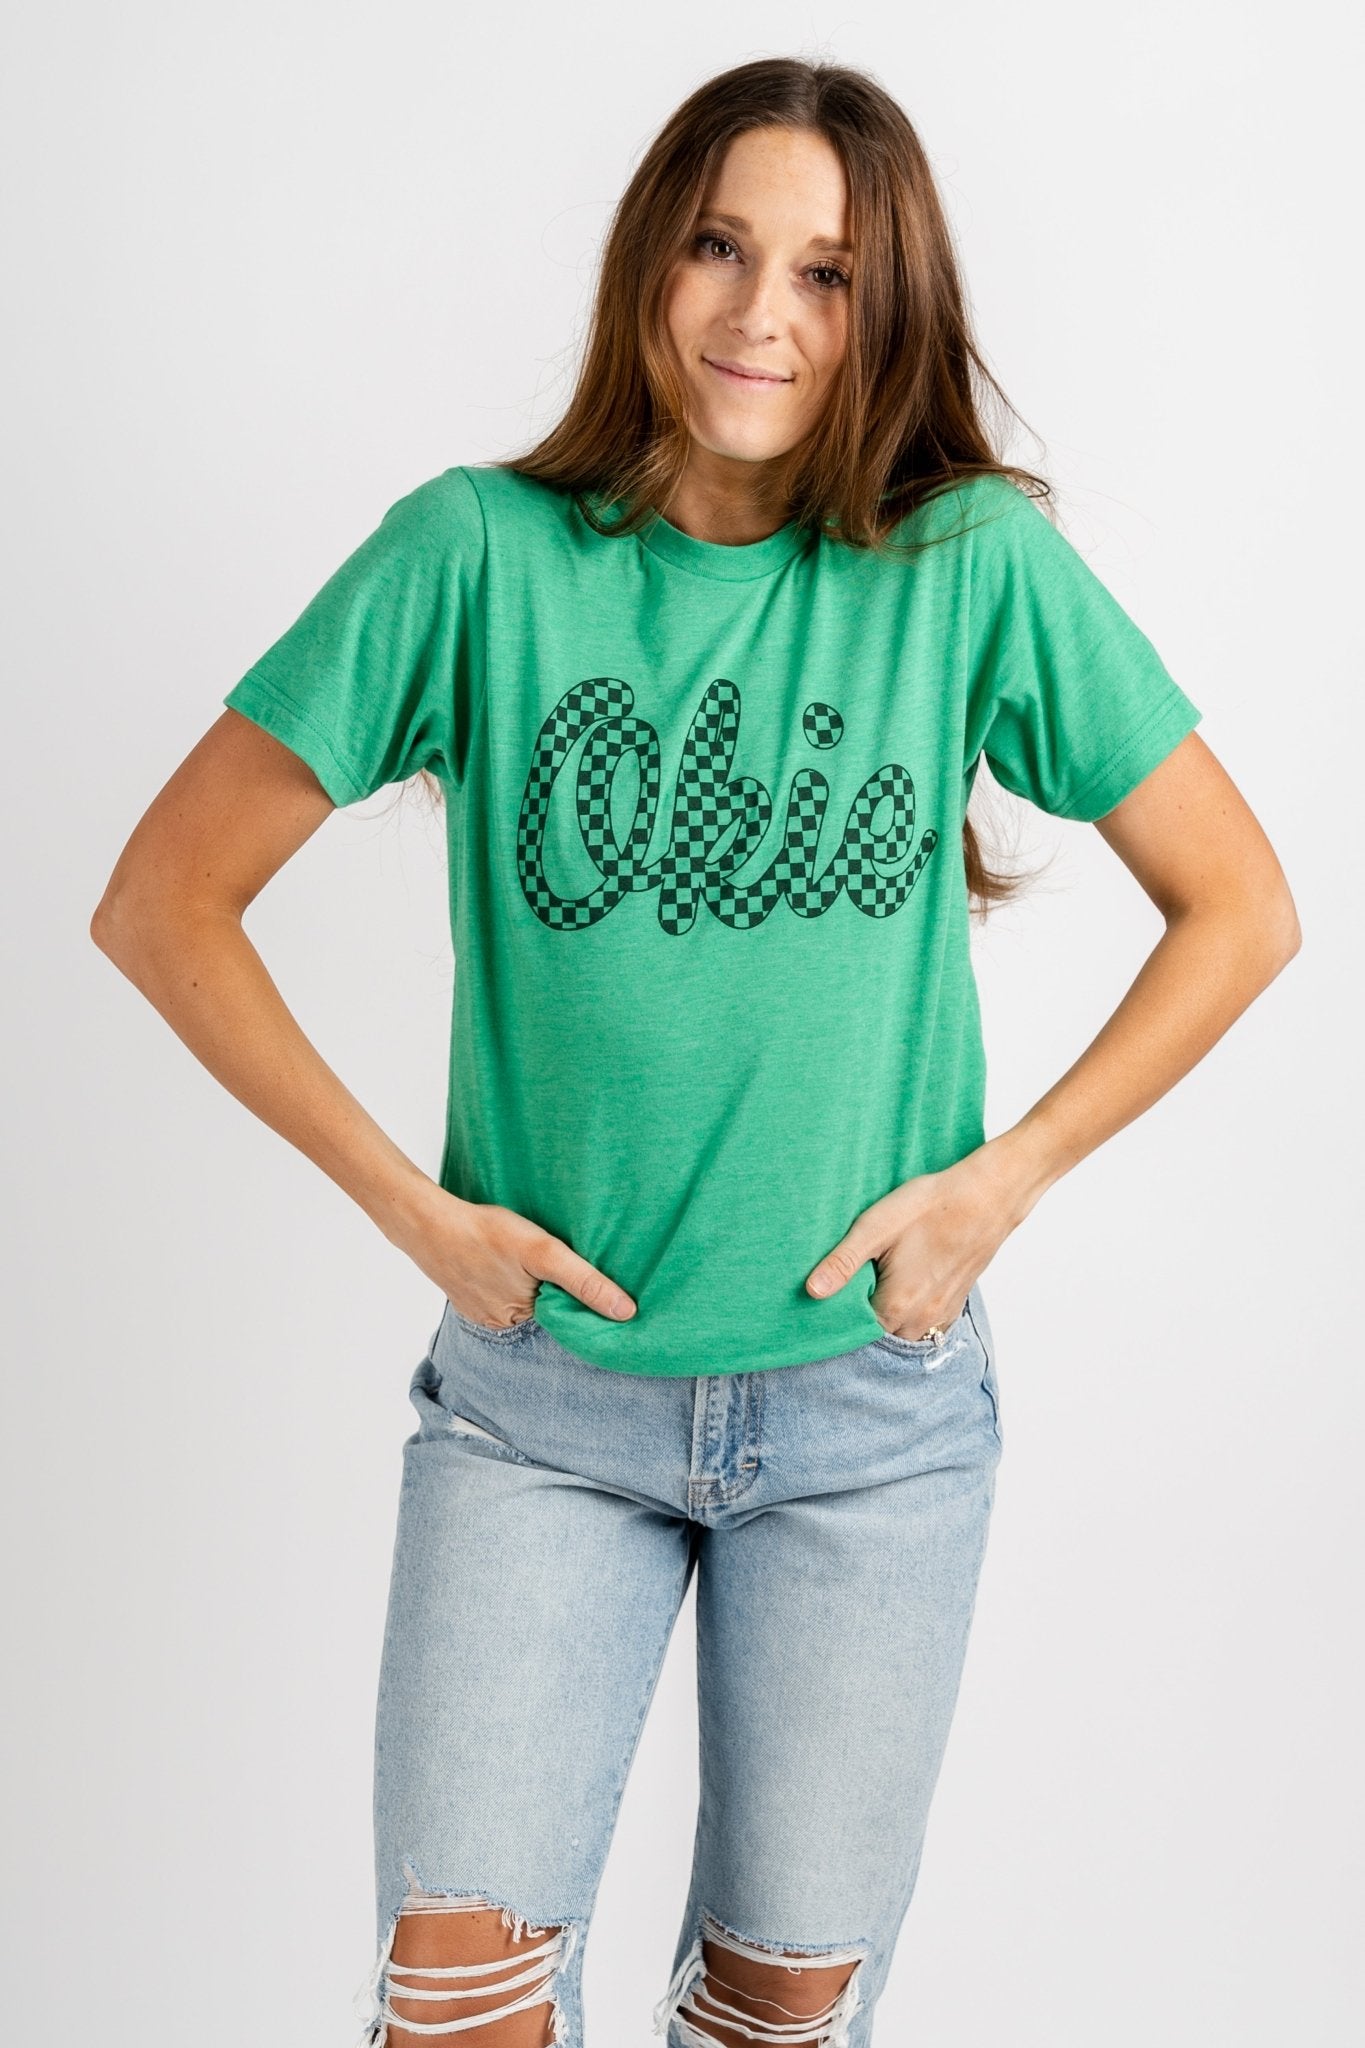 Okie checkered t-shirt green - Unique St. Patrick's Day T-Shirt Designs at Lush Fashion Lounge Boutique in Oklahoma City